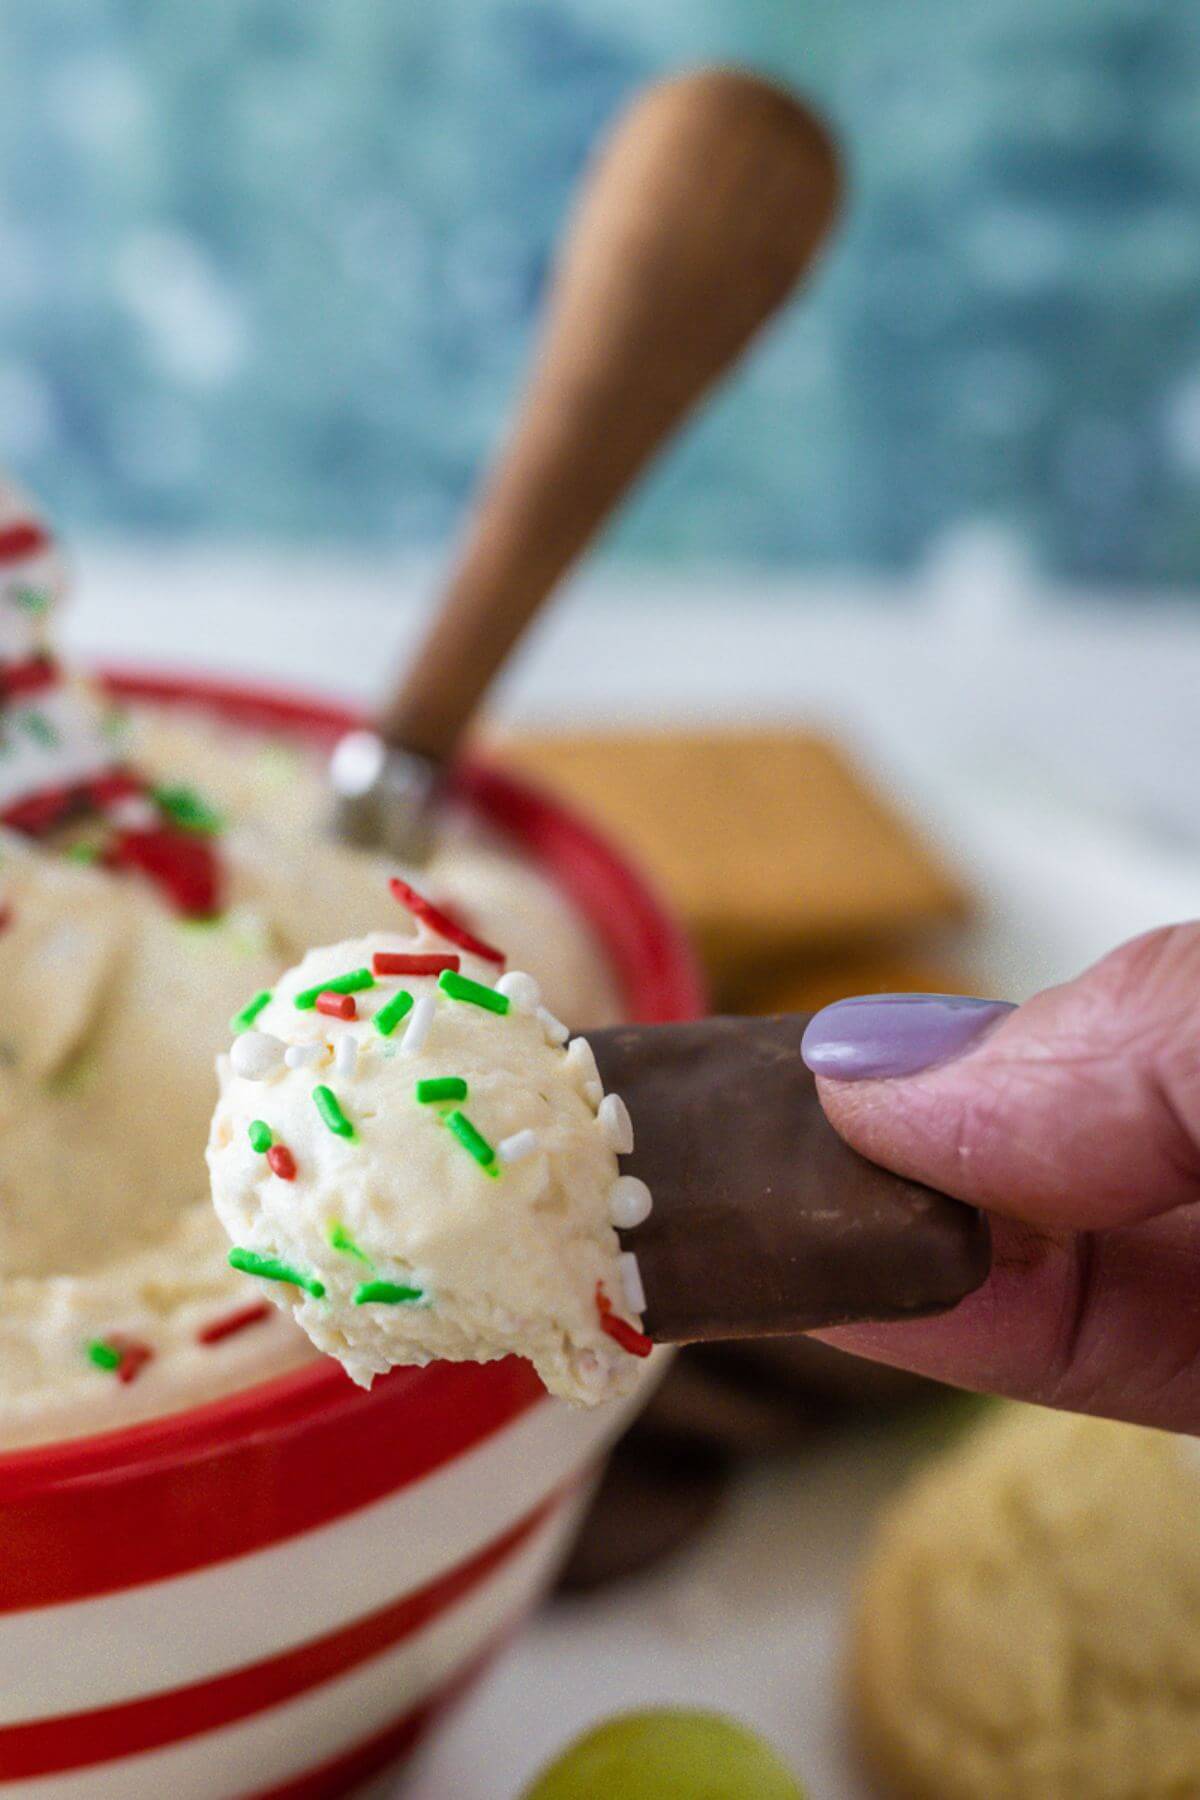 A hand is holding a chocolate graham cracker with Christmas tree cake dip on half of it from the bowl.